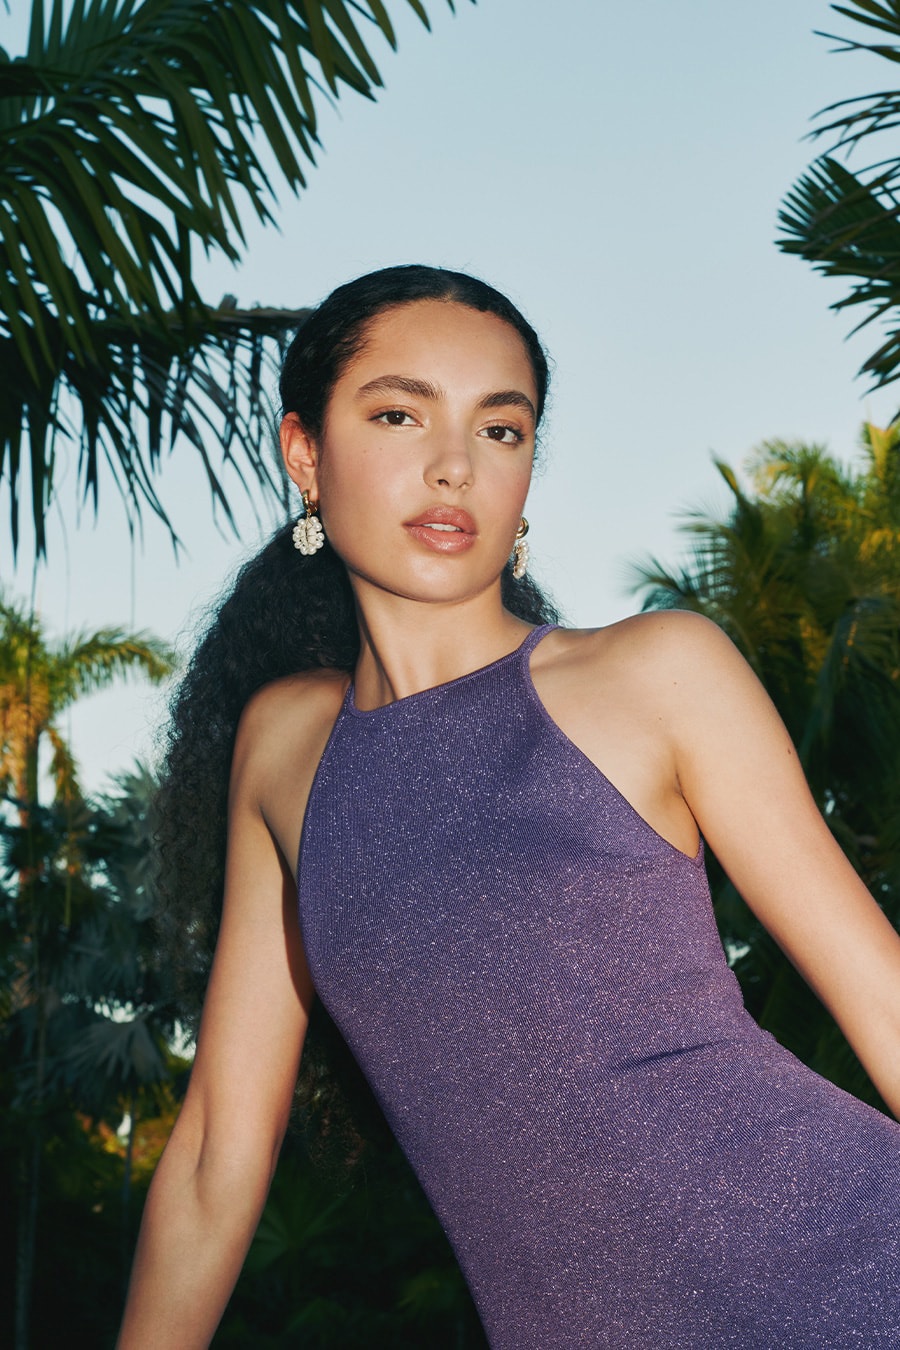 maje éliou capsule collection exclusive limited edition collaboration ready to wear swimwear clothing summer jewelry necklaces earrings tropical purple colorful accessories miami parisian